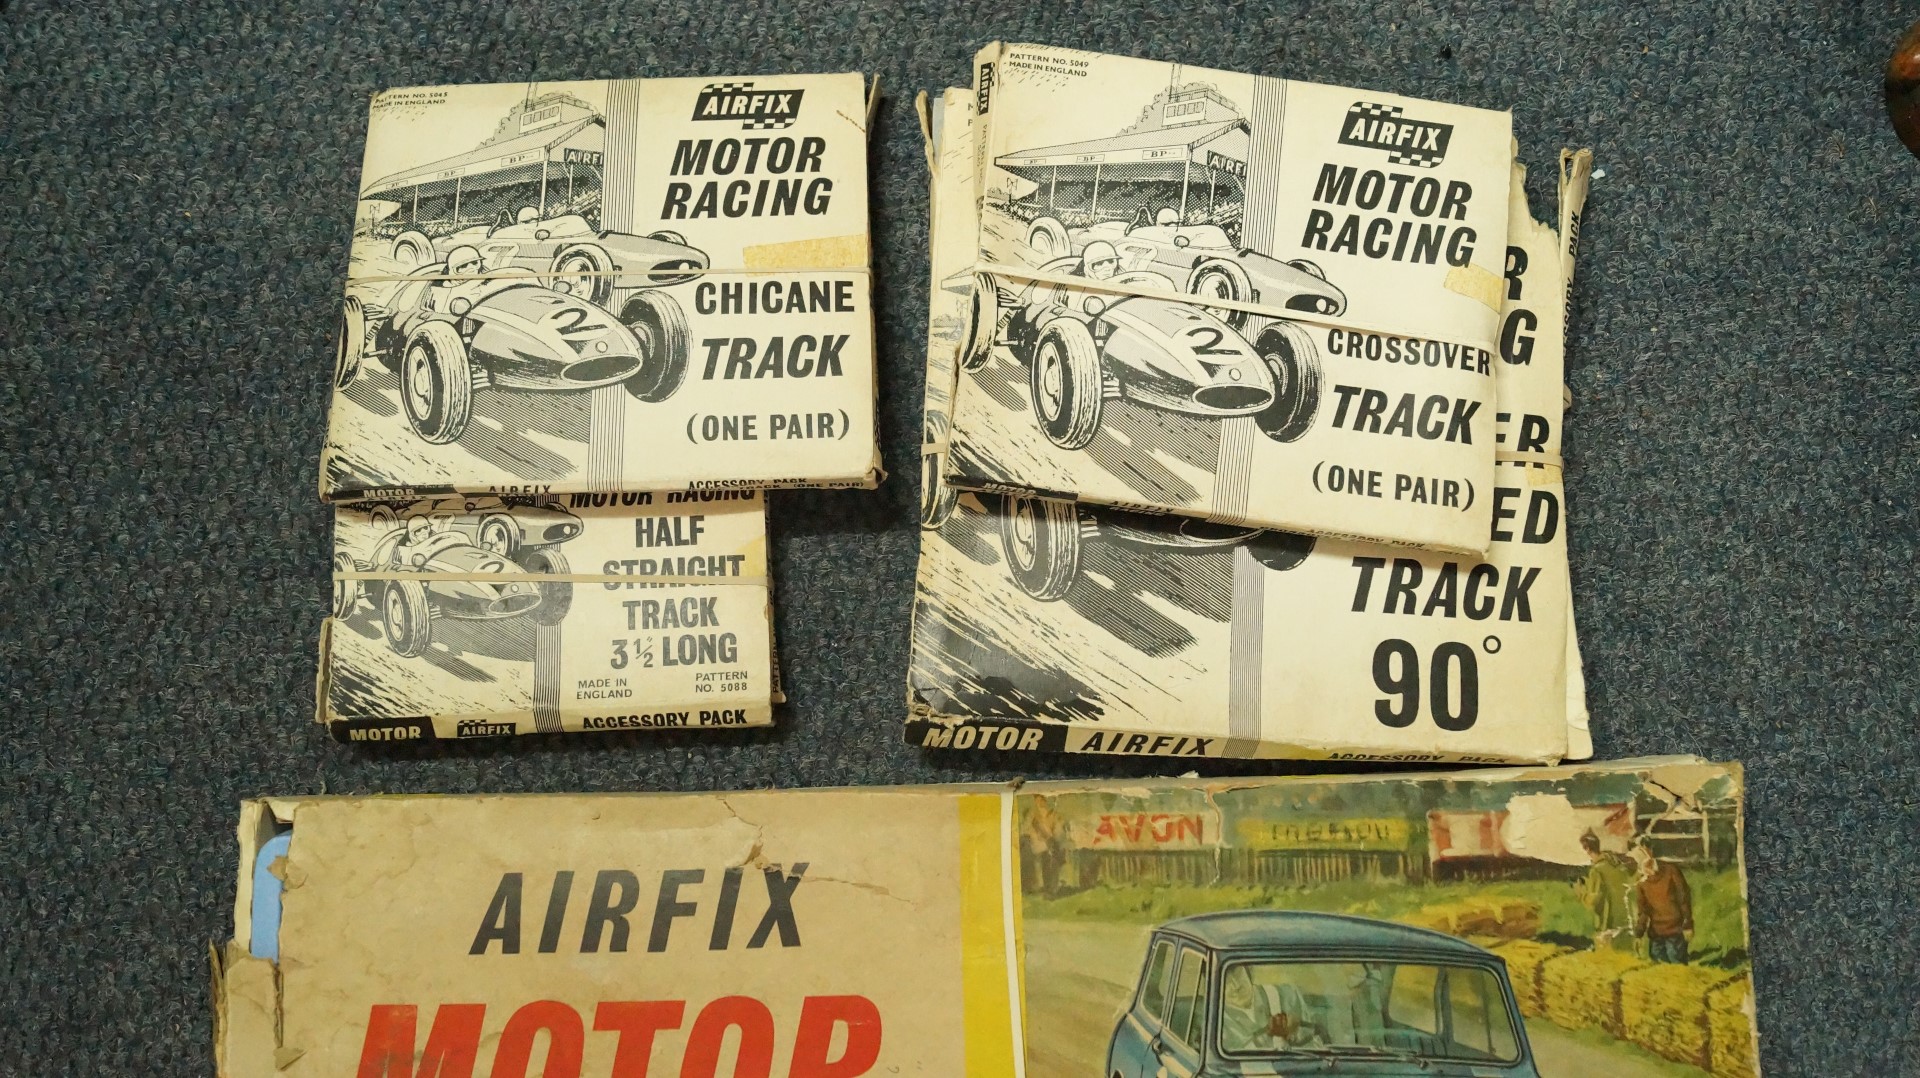 Airfix Motor Racing: an 'MR 125' set; together with 'Inner Curved Track 90'; - Image 3 of 3